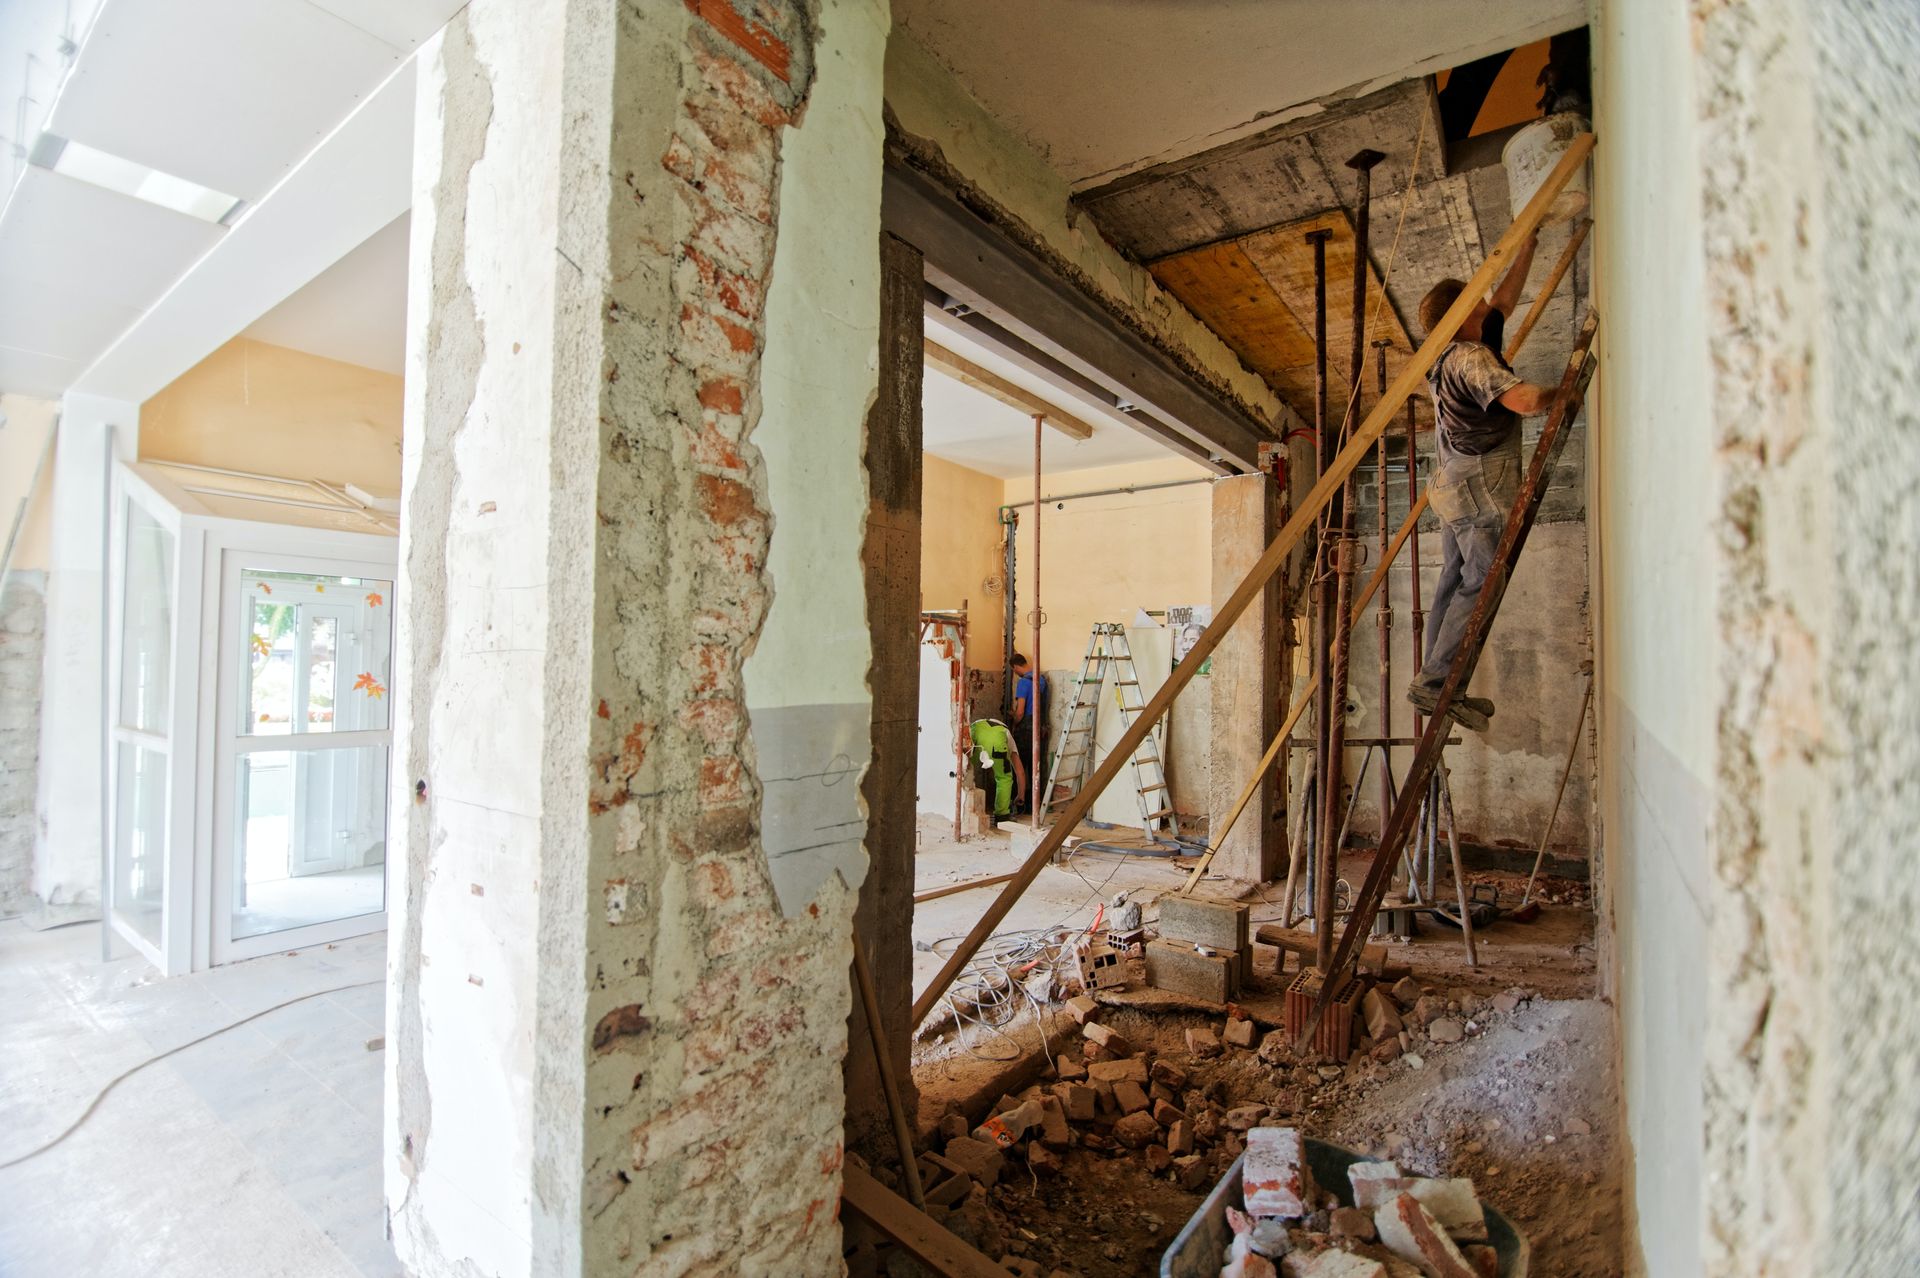 Workers installing wall during a home renovation